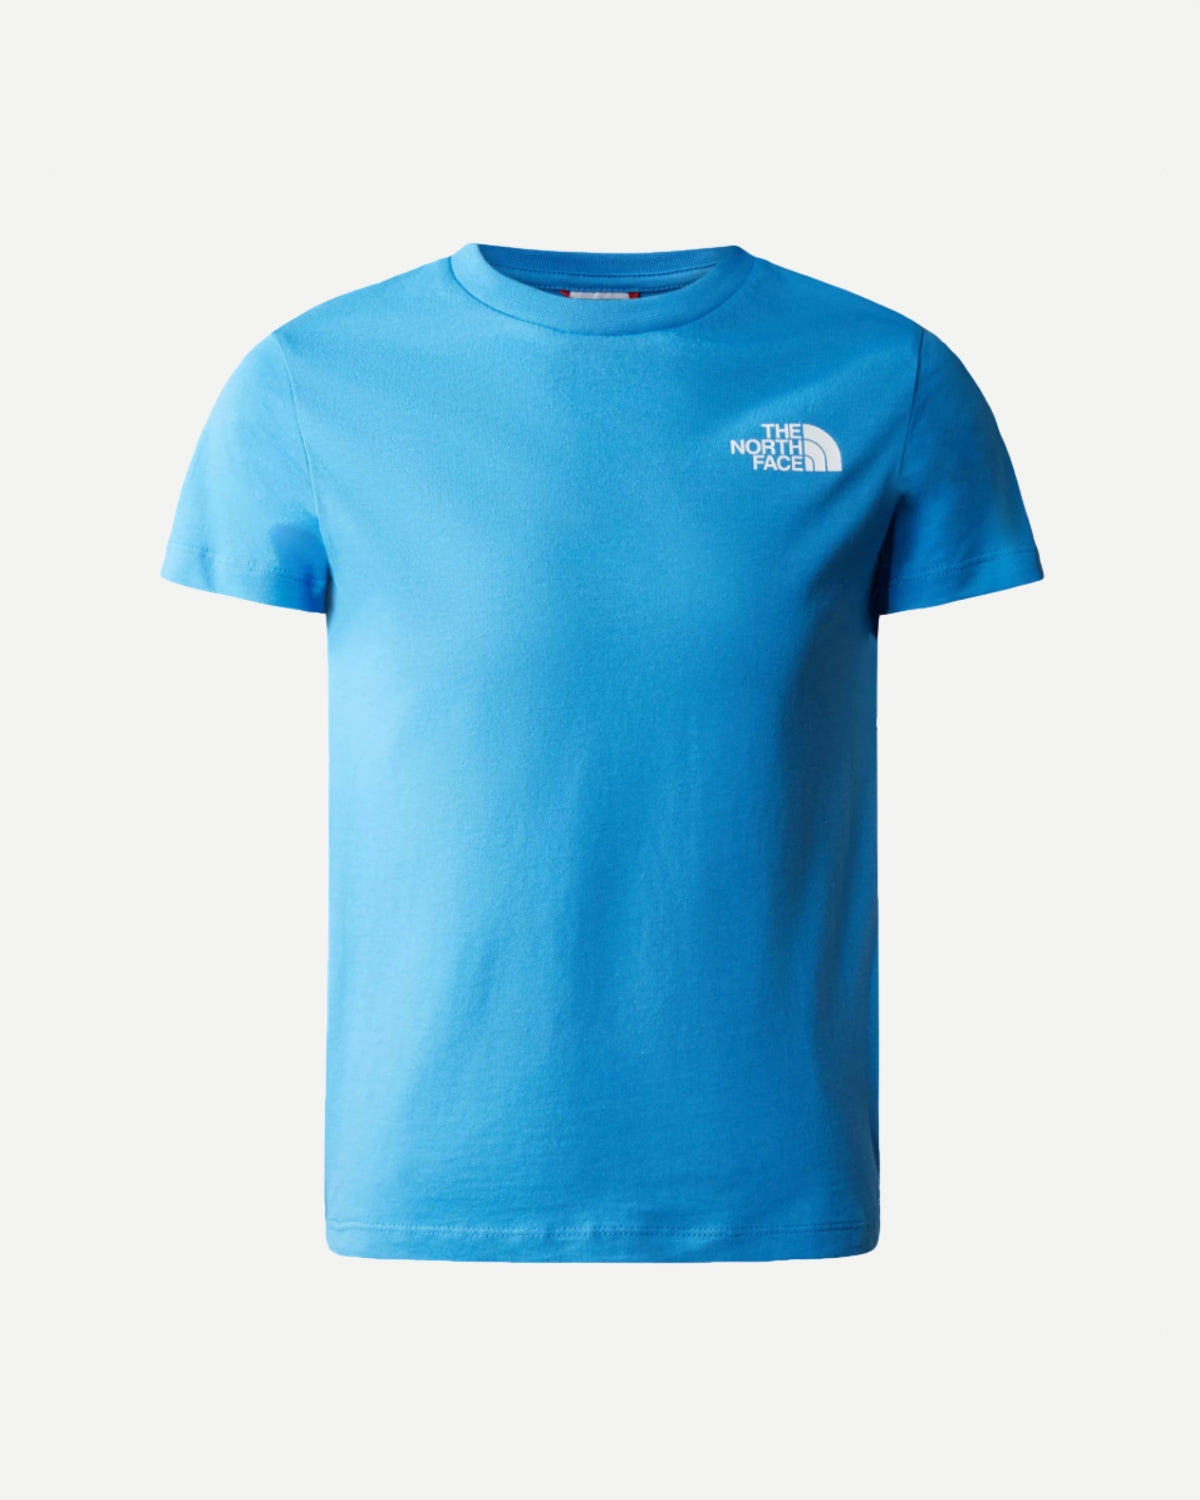 Teens S/S Simple Dome Tee - Super Sonic Blue - The North Face - Munkstore.dk